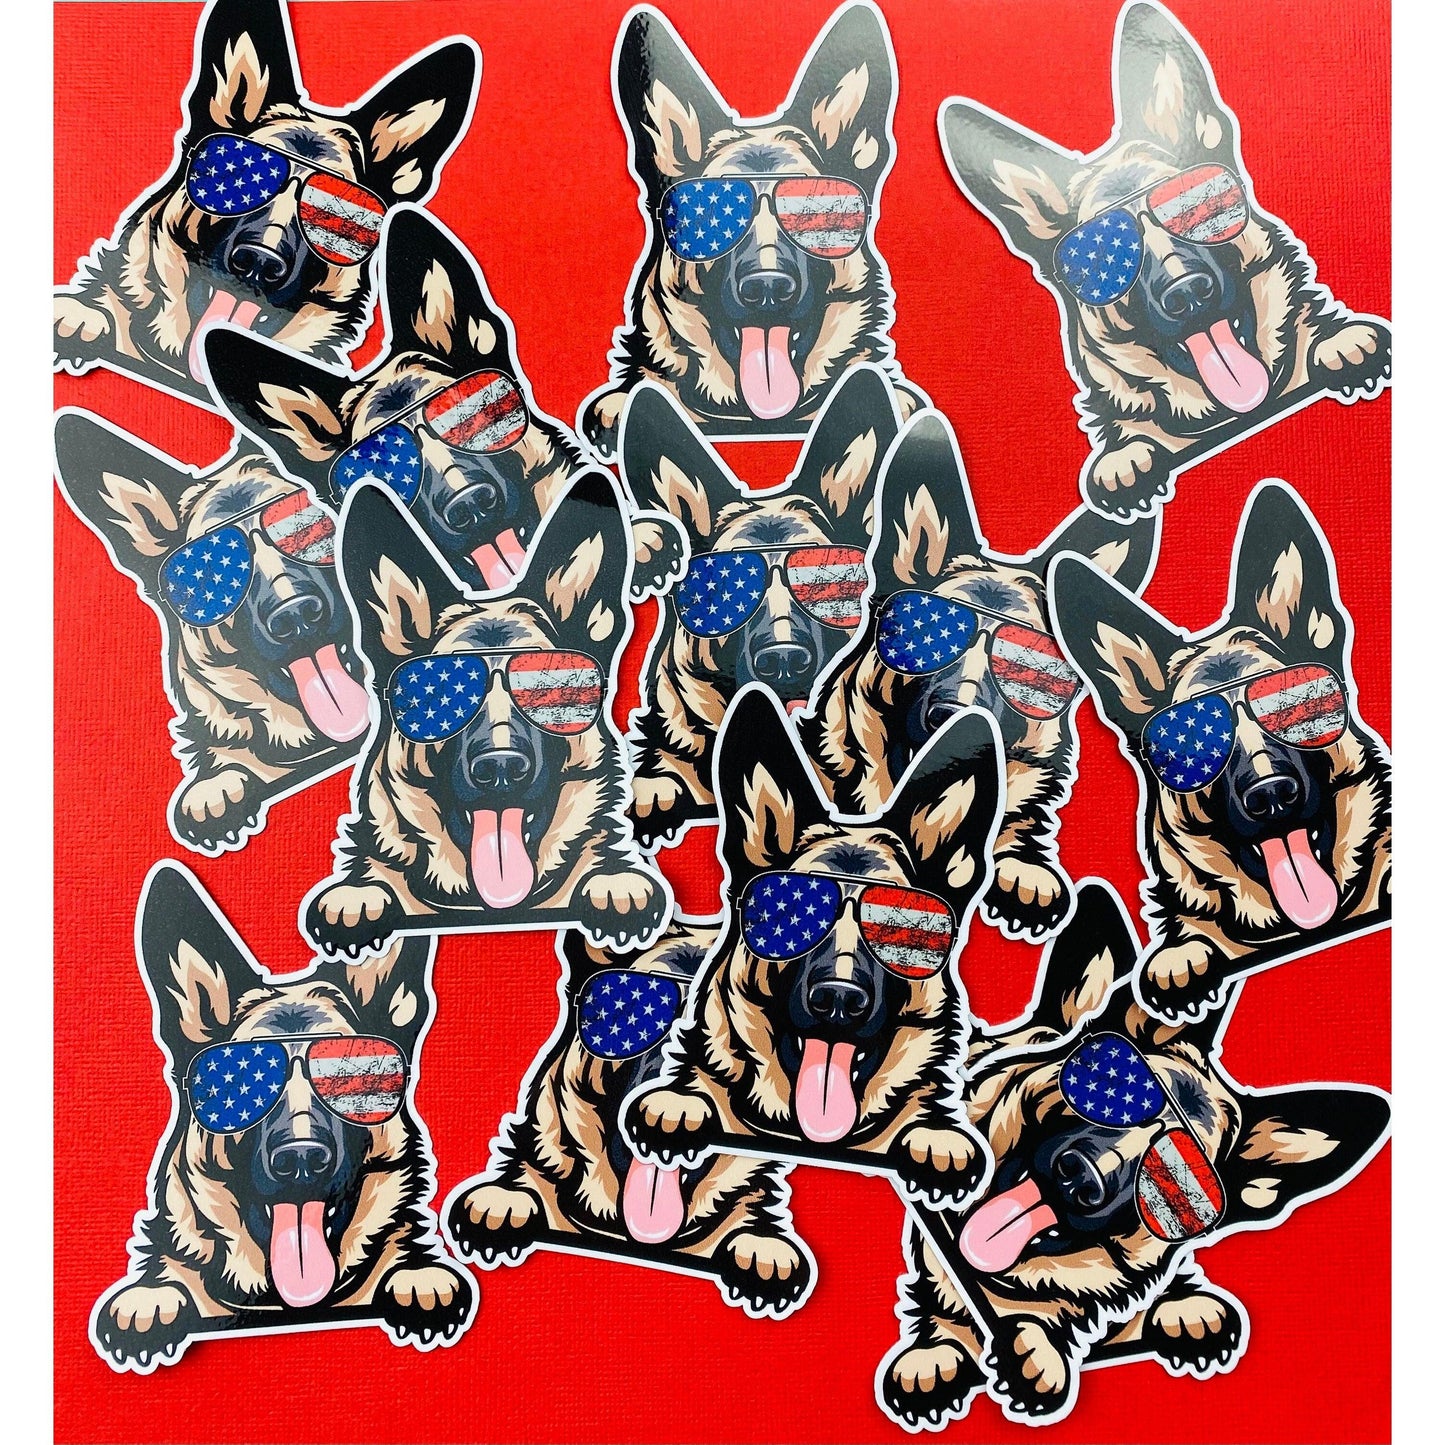 K9 Sticker German Shephed Paws Sticker Cute GSD Dog Decal for Car, Hydroflask, Schutzhund, American Flag Aviators - Ottos Grotto :: Stickers For Your Stuff